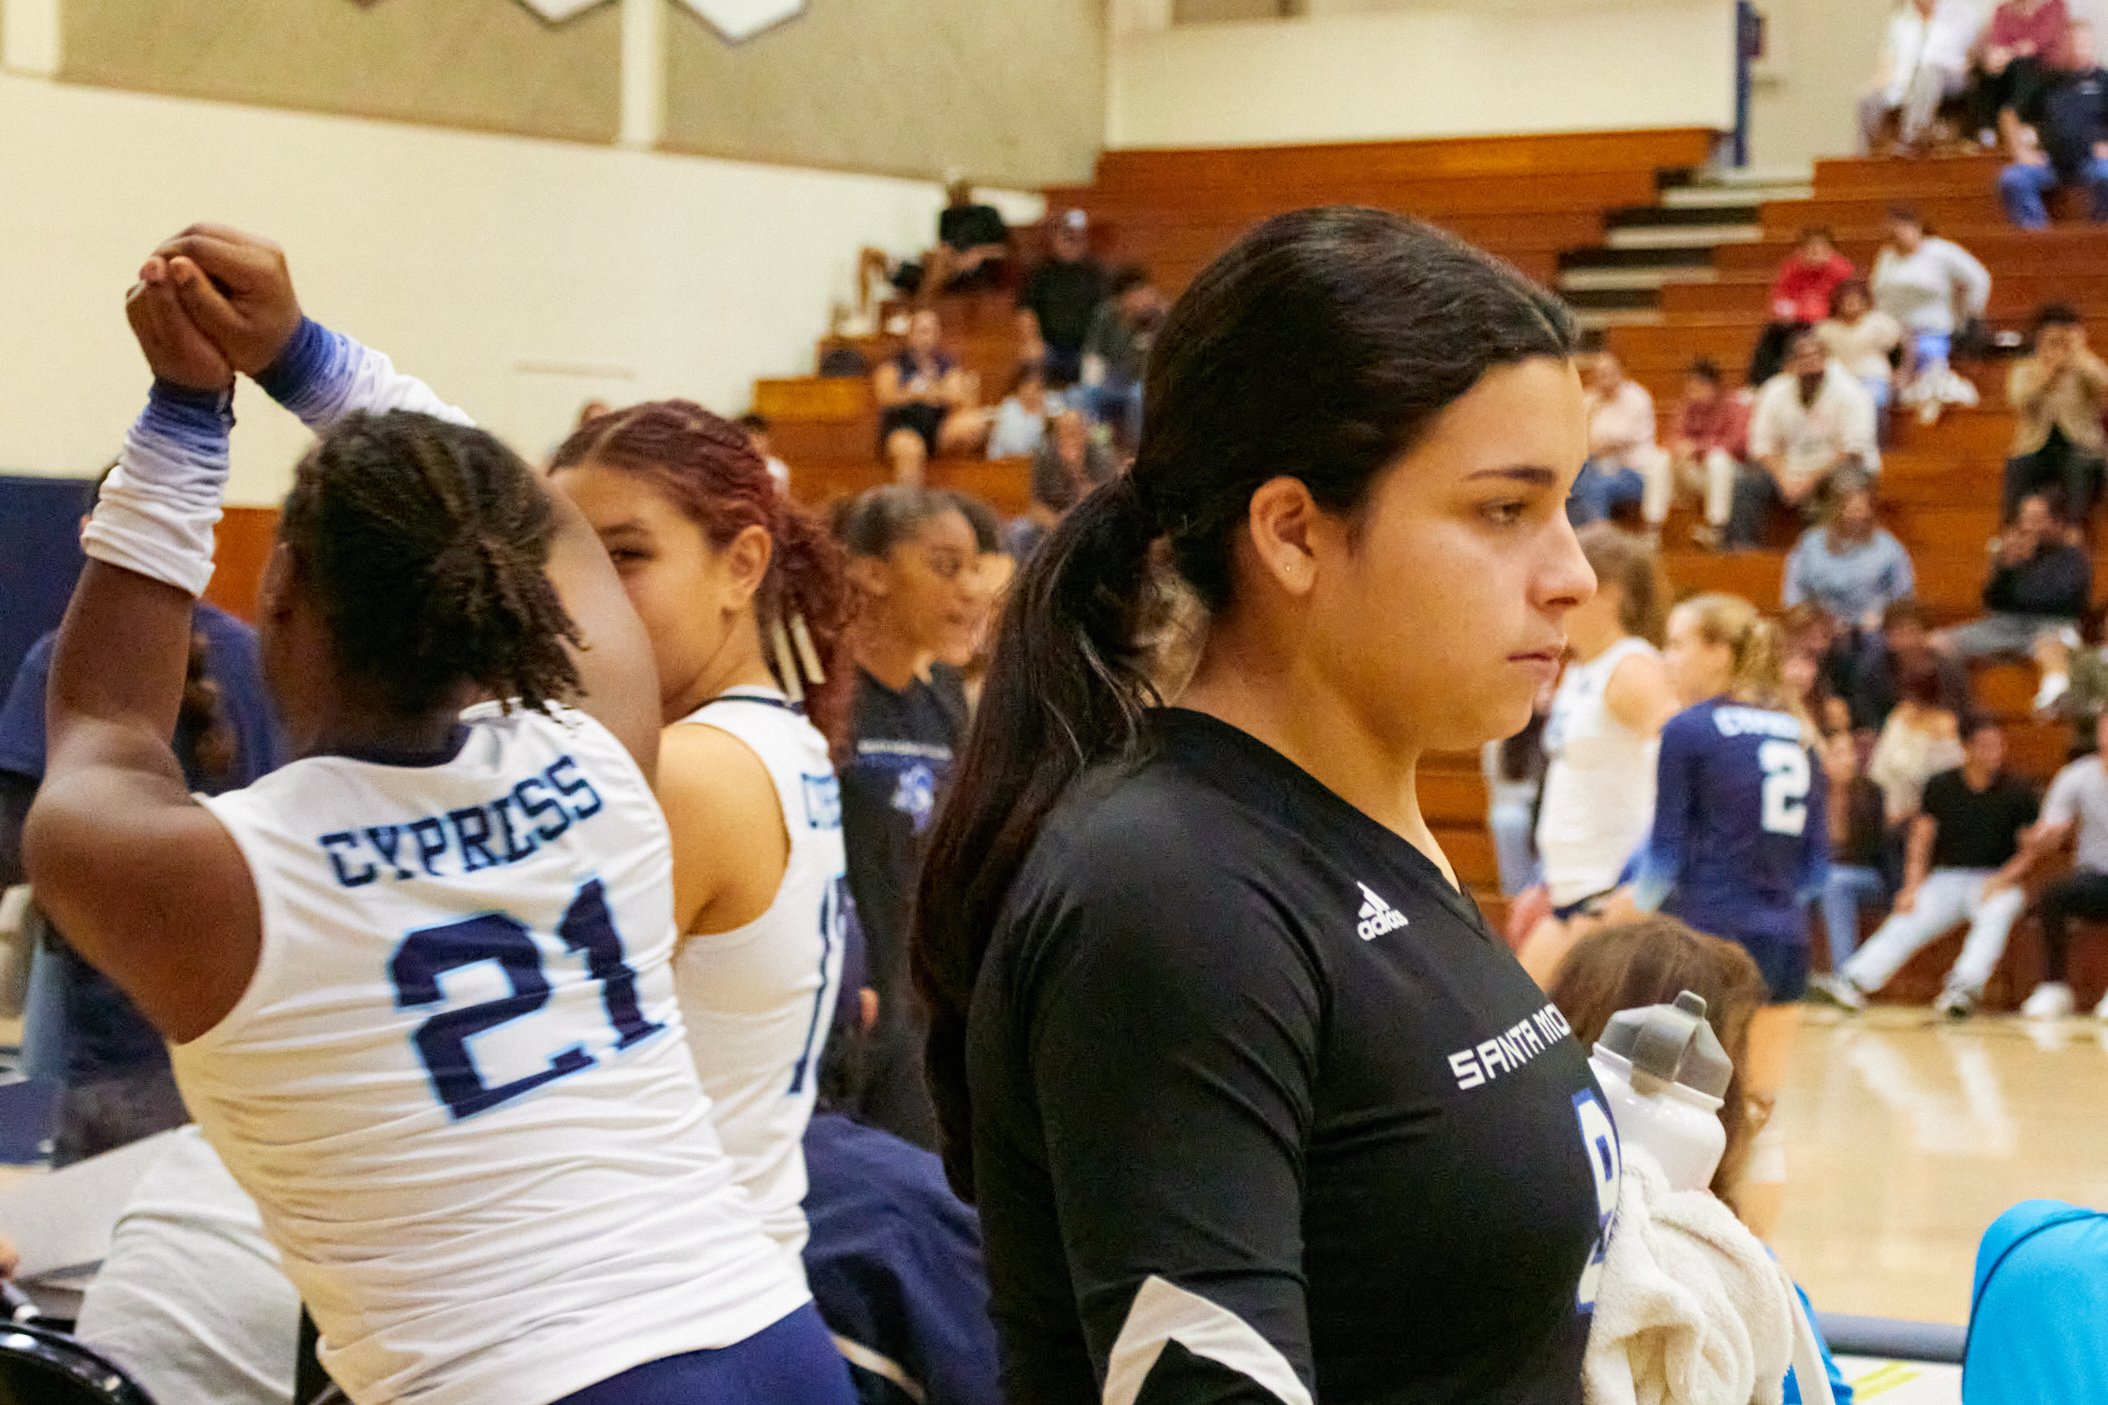  Santa Monica College Corsairs middle blocker Adriana Brady (right) walking past Cypress College Chargers outside hitter Zariah Honeycutt (no. 21) and opposite hitter Kaitlyn Emma Casino (no. 17) during the women's volleyball match against each other